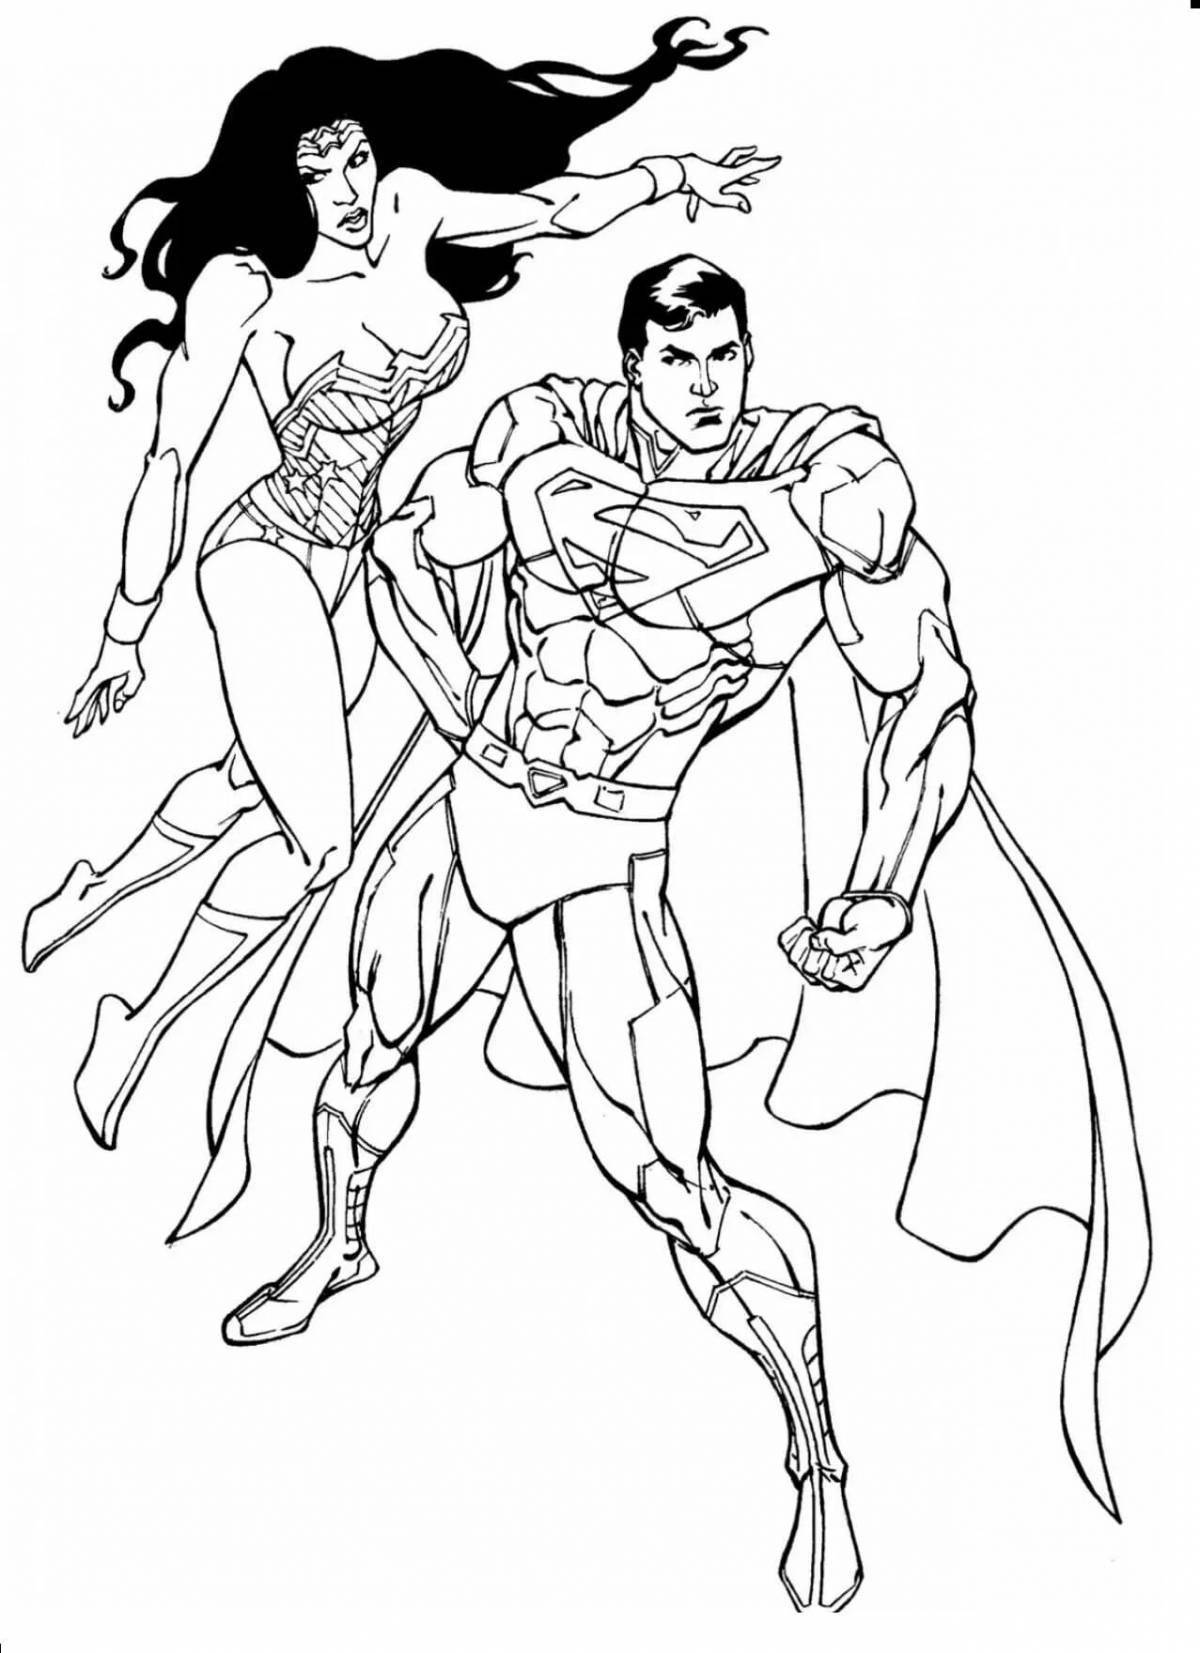 Bright superman and batman coloring pages